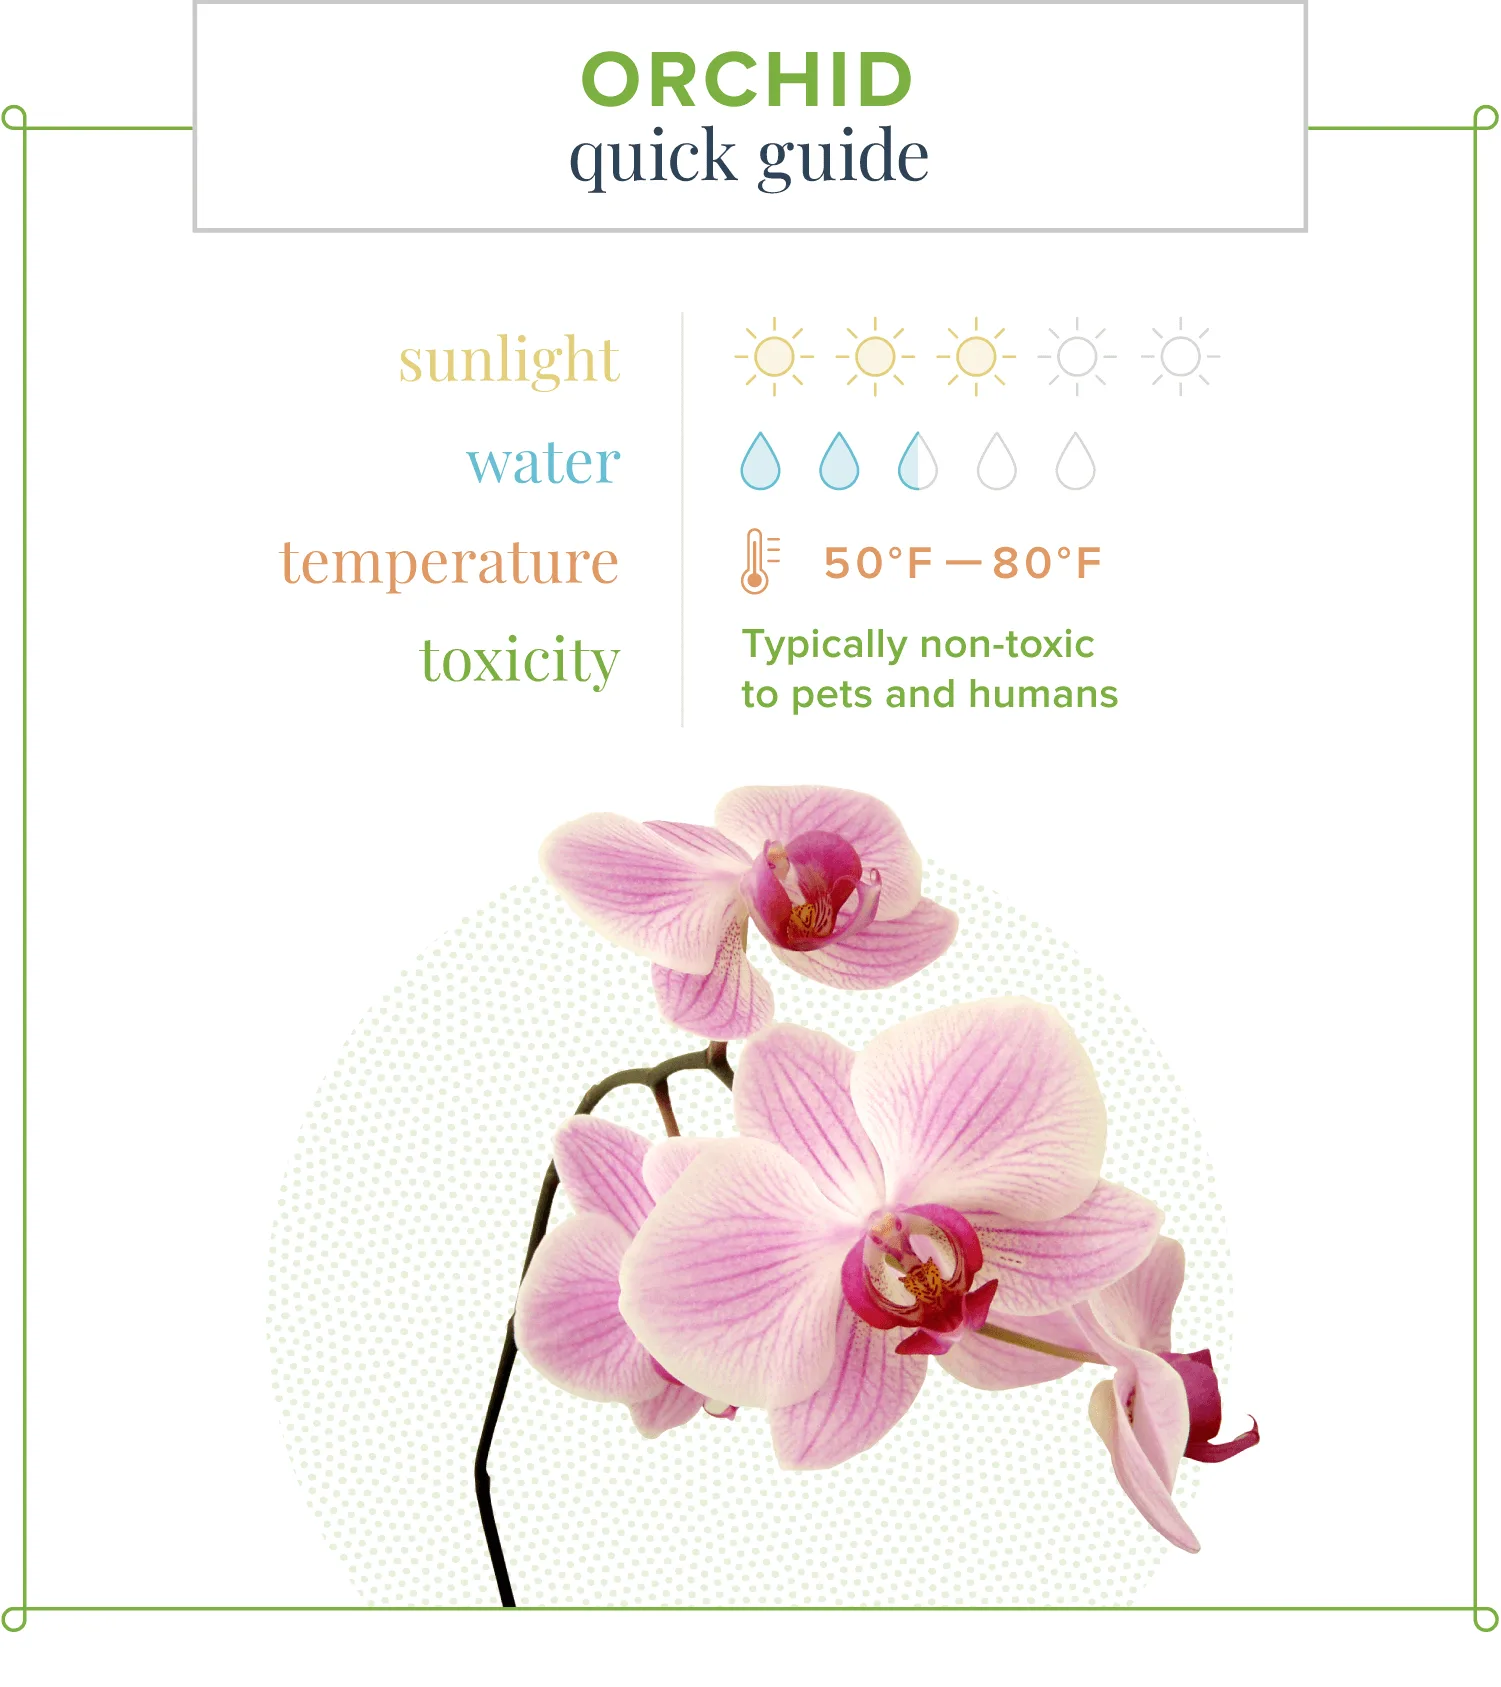 Orchid Care Guide: Care Instructions for 23 Popular Orchids